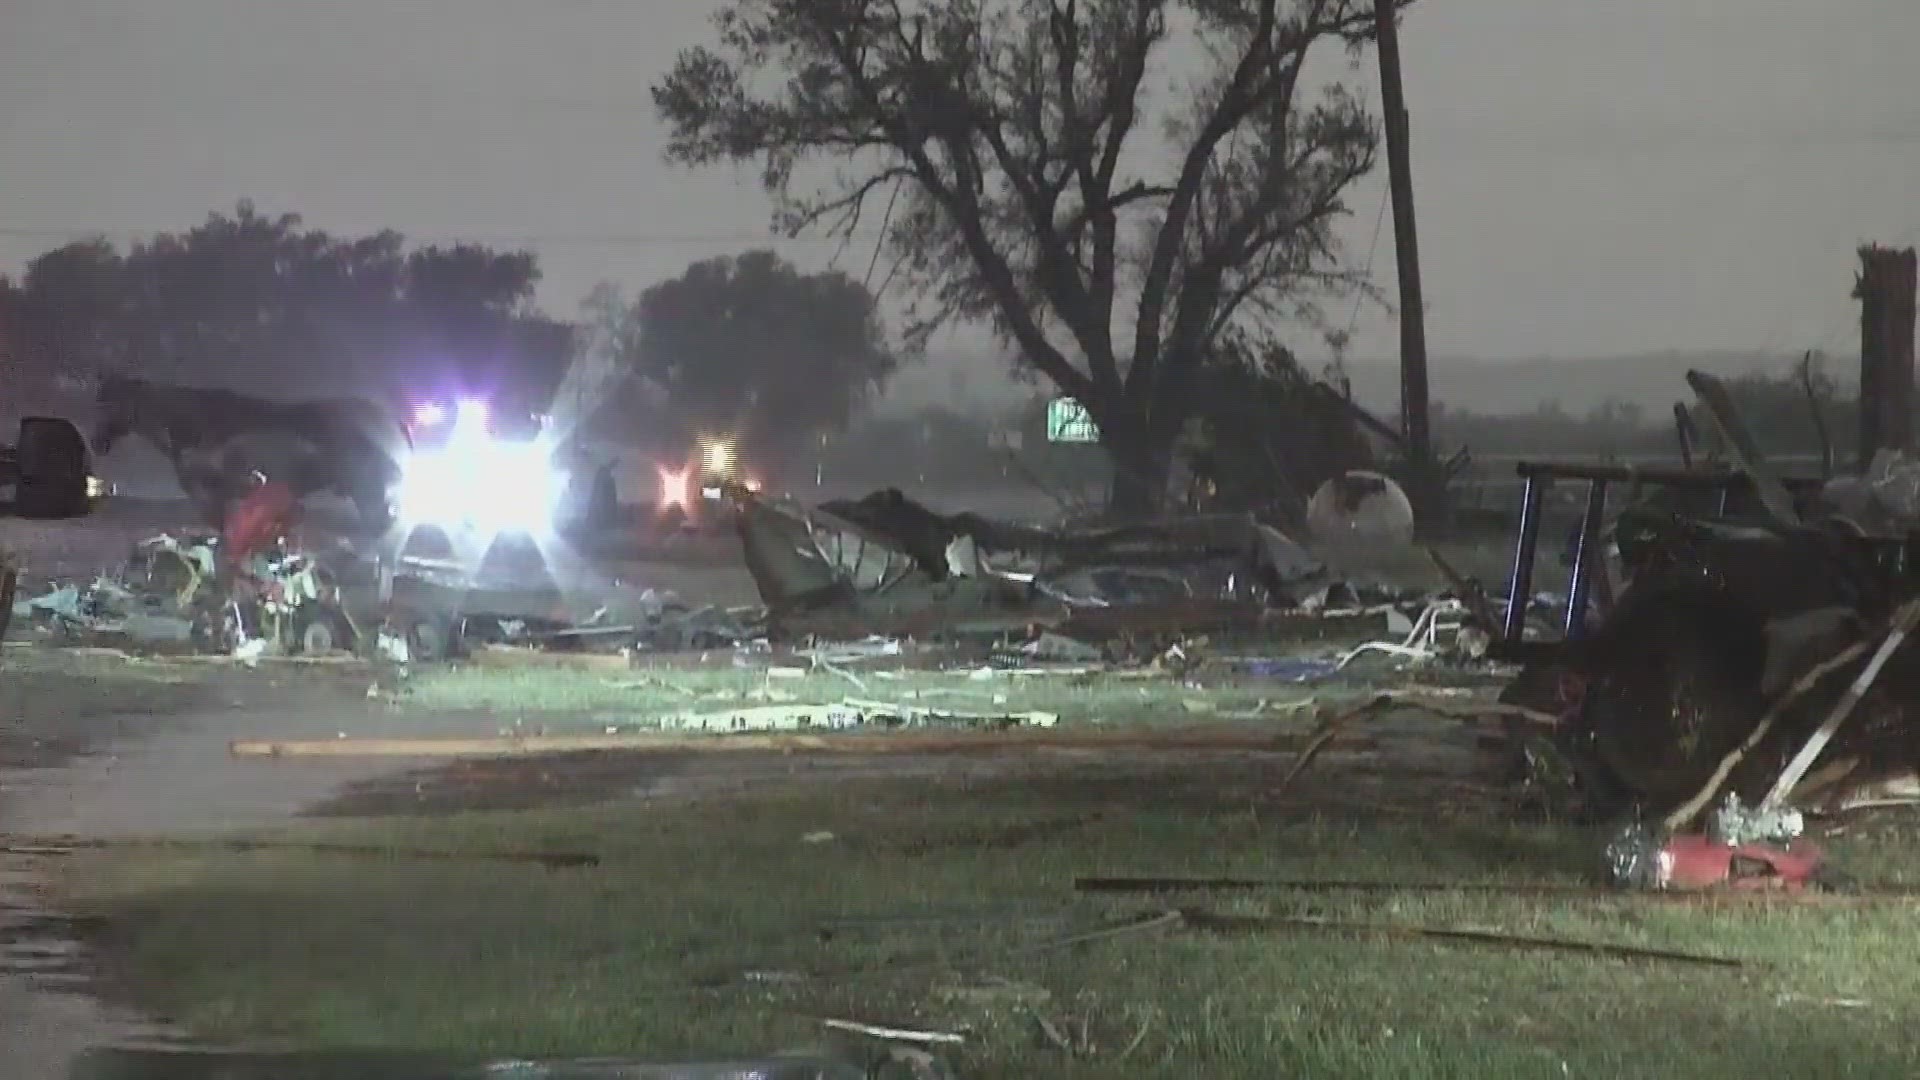 Meteorologists say a rare combination of tornadoes, hurricane-force wind and large hail devastated the small Texas town.